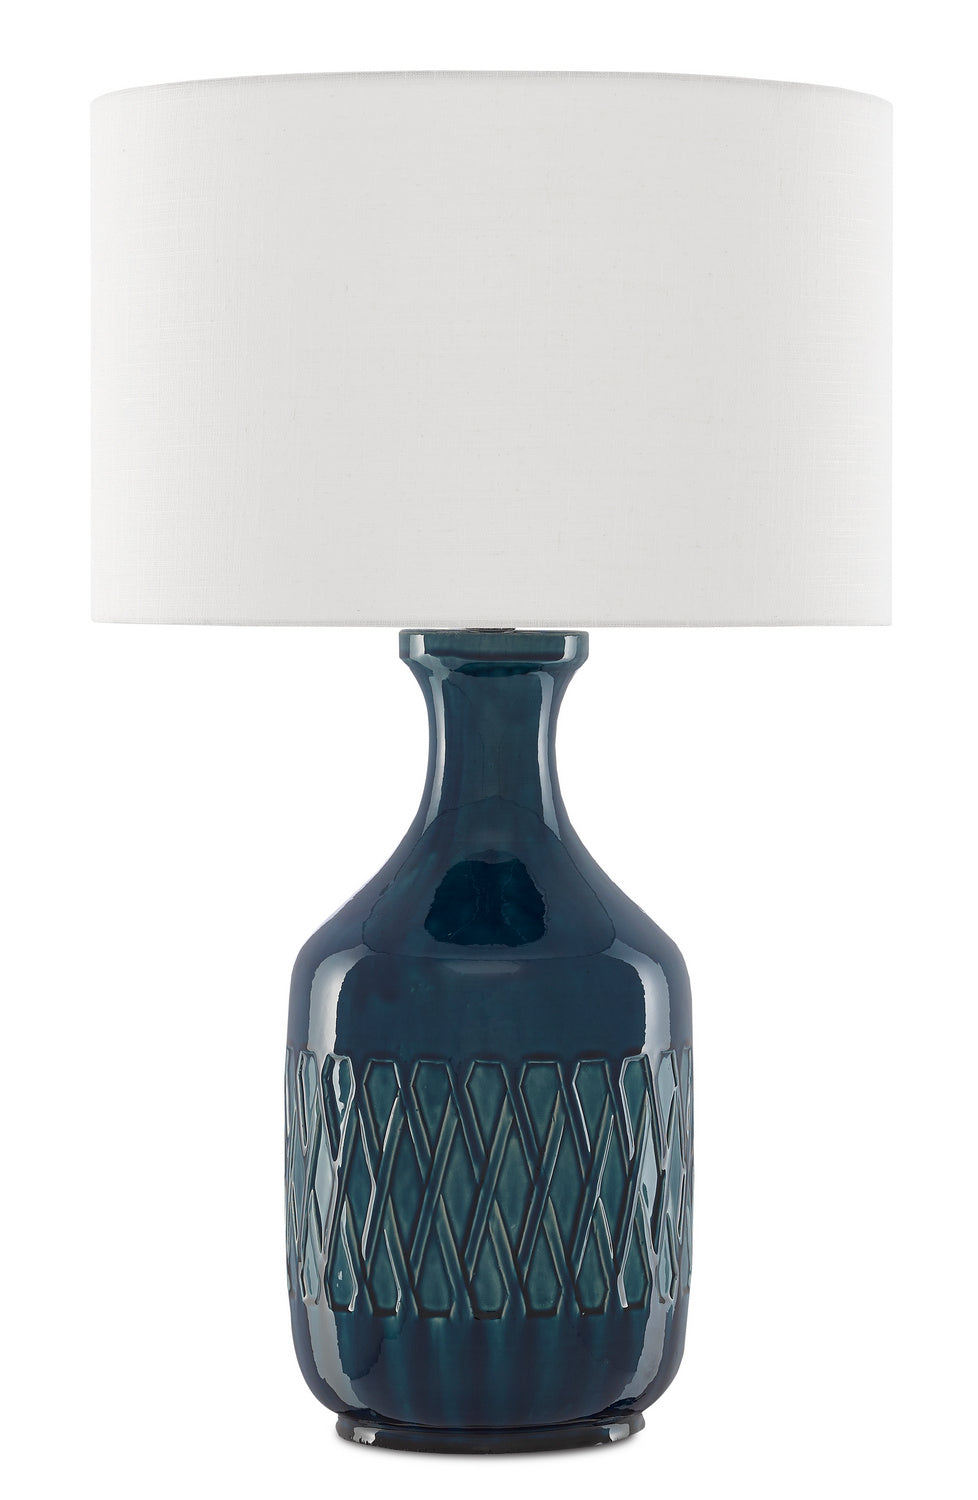 One Light Table Lamp from the Samba collection in Ocean Blue finish